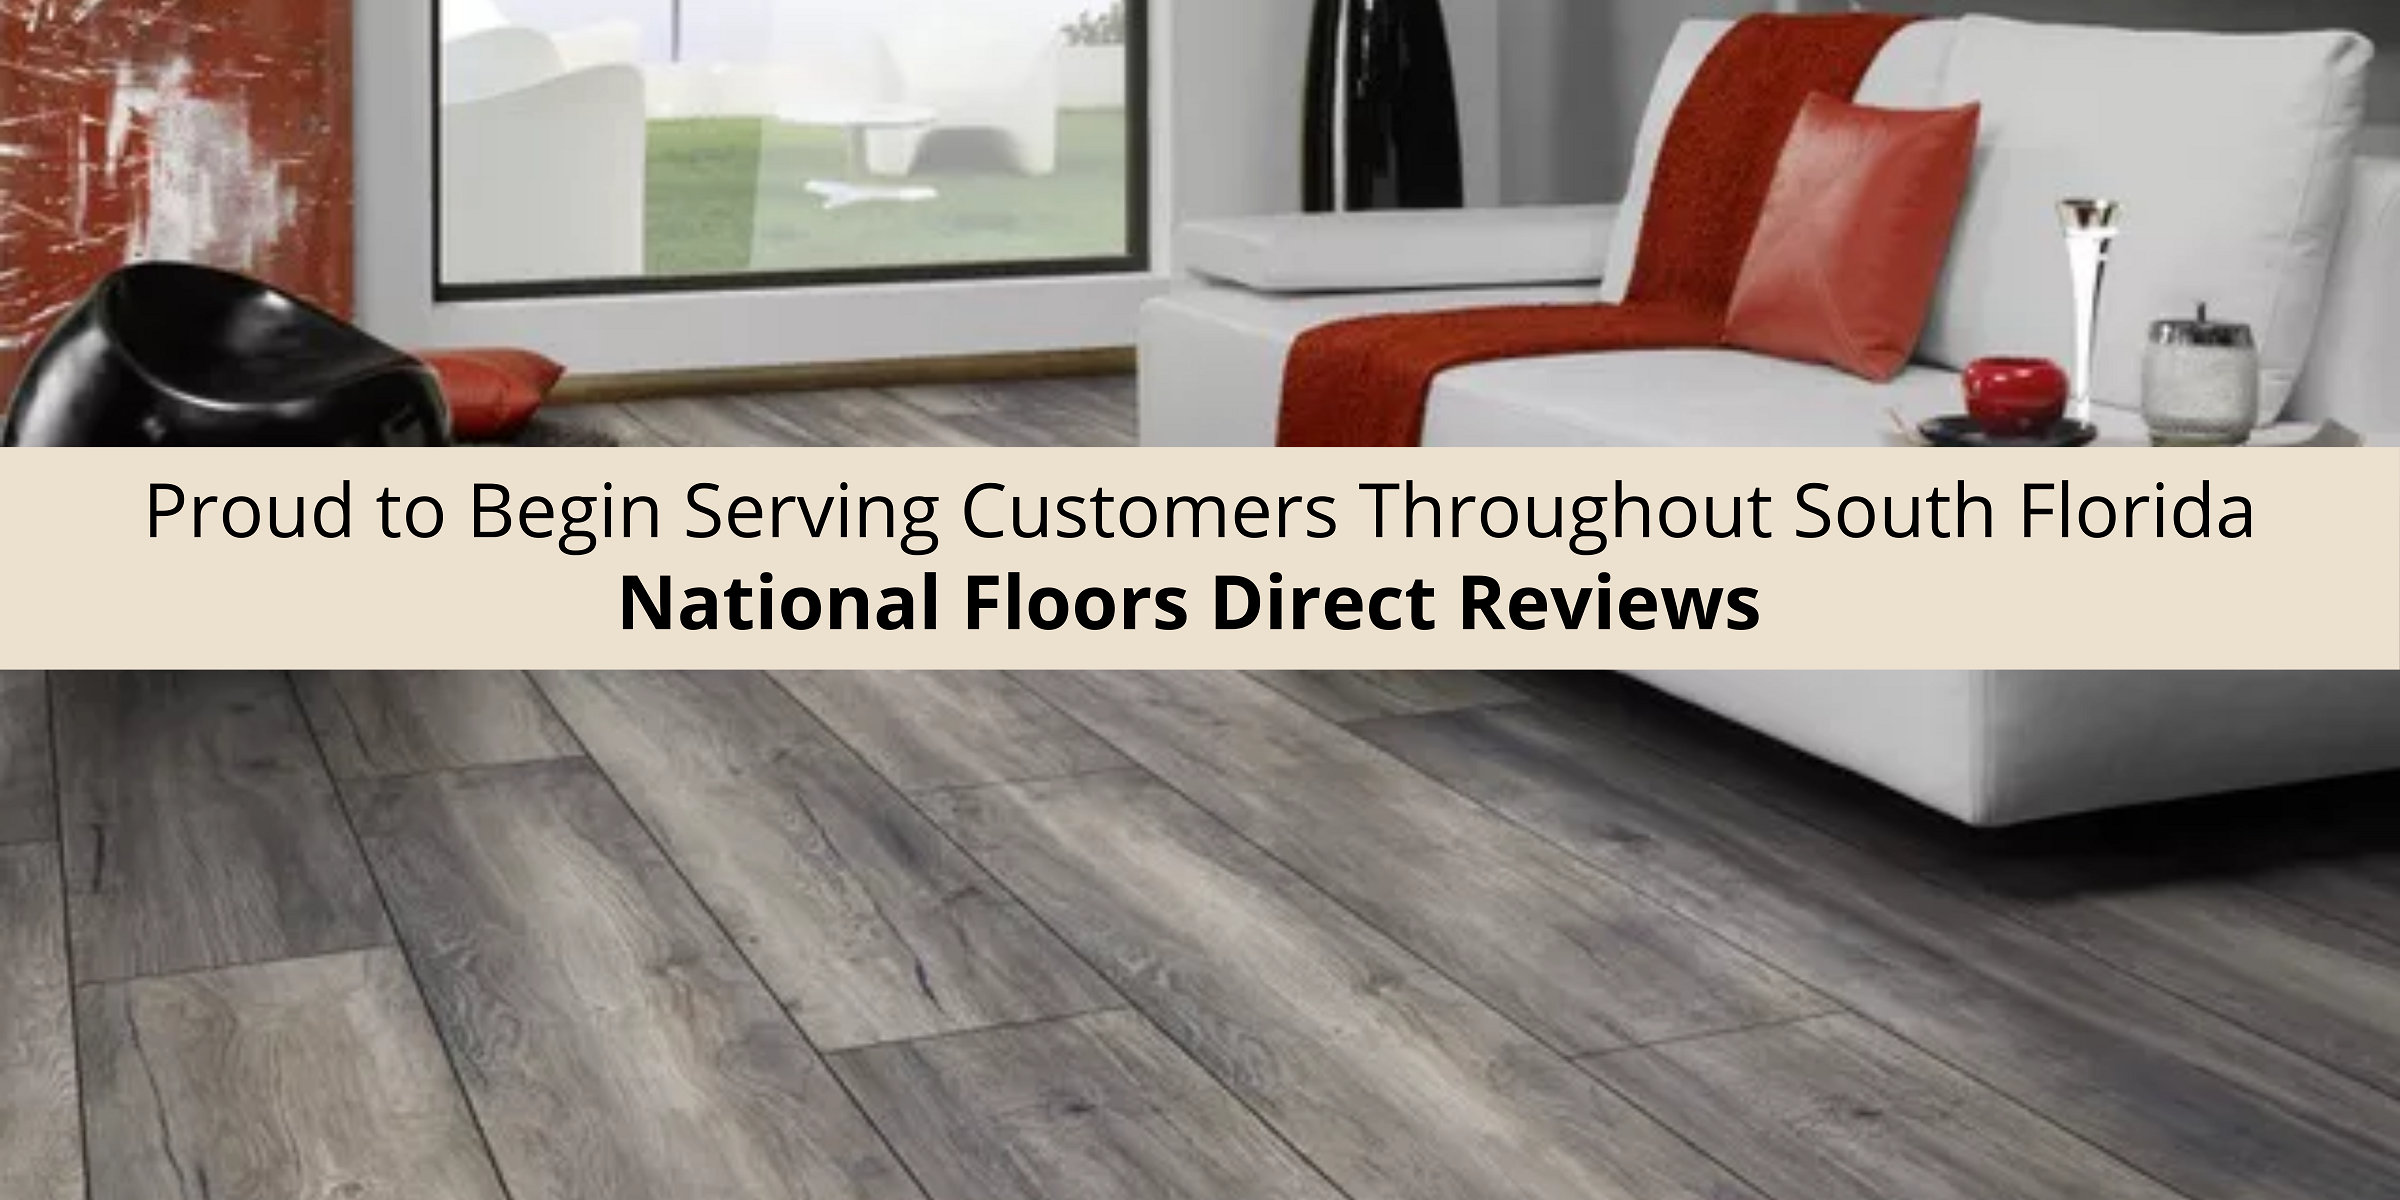 National Floors Direct Reviews is Proud to Begin Serving Customers